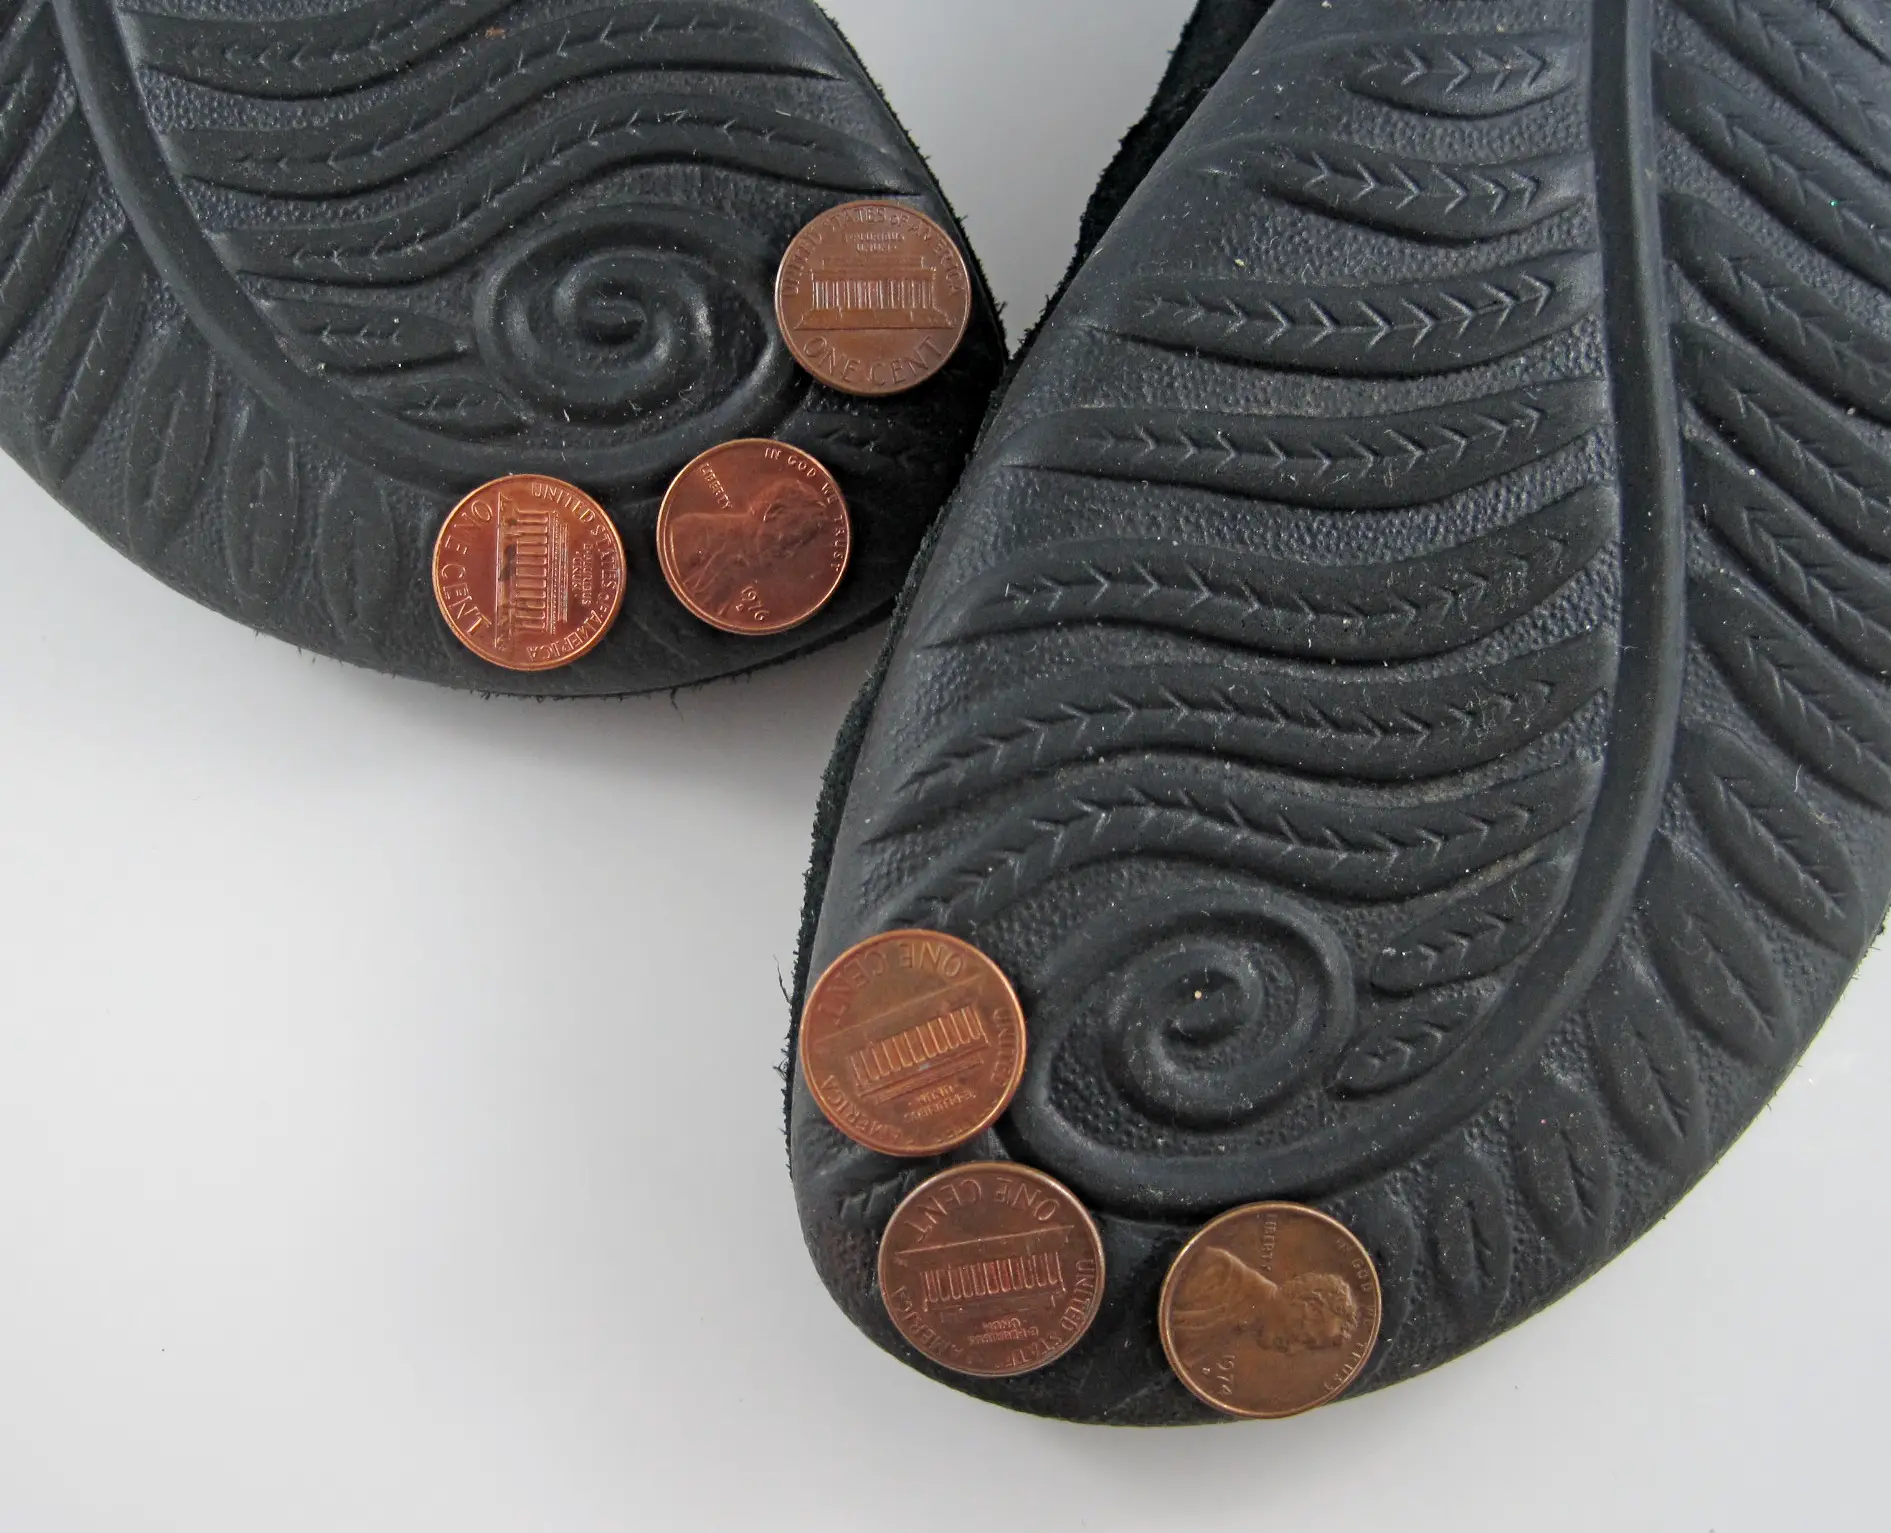 Why Glue Pennies To The Bottom Of Your Shoes